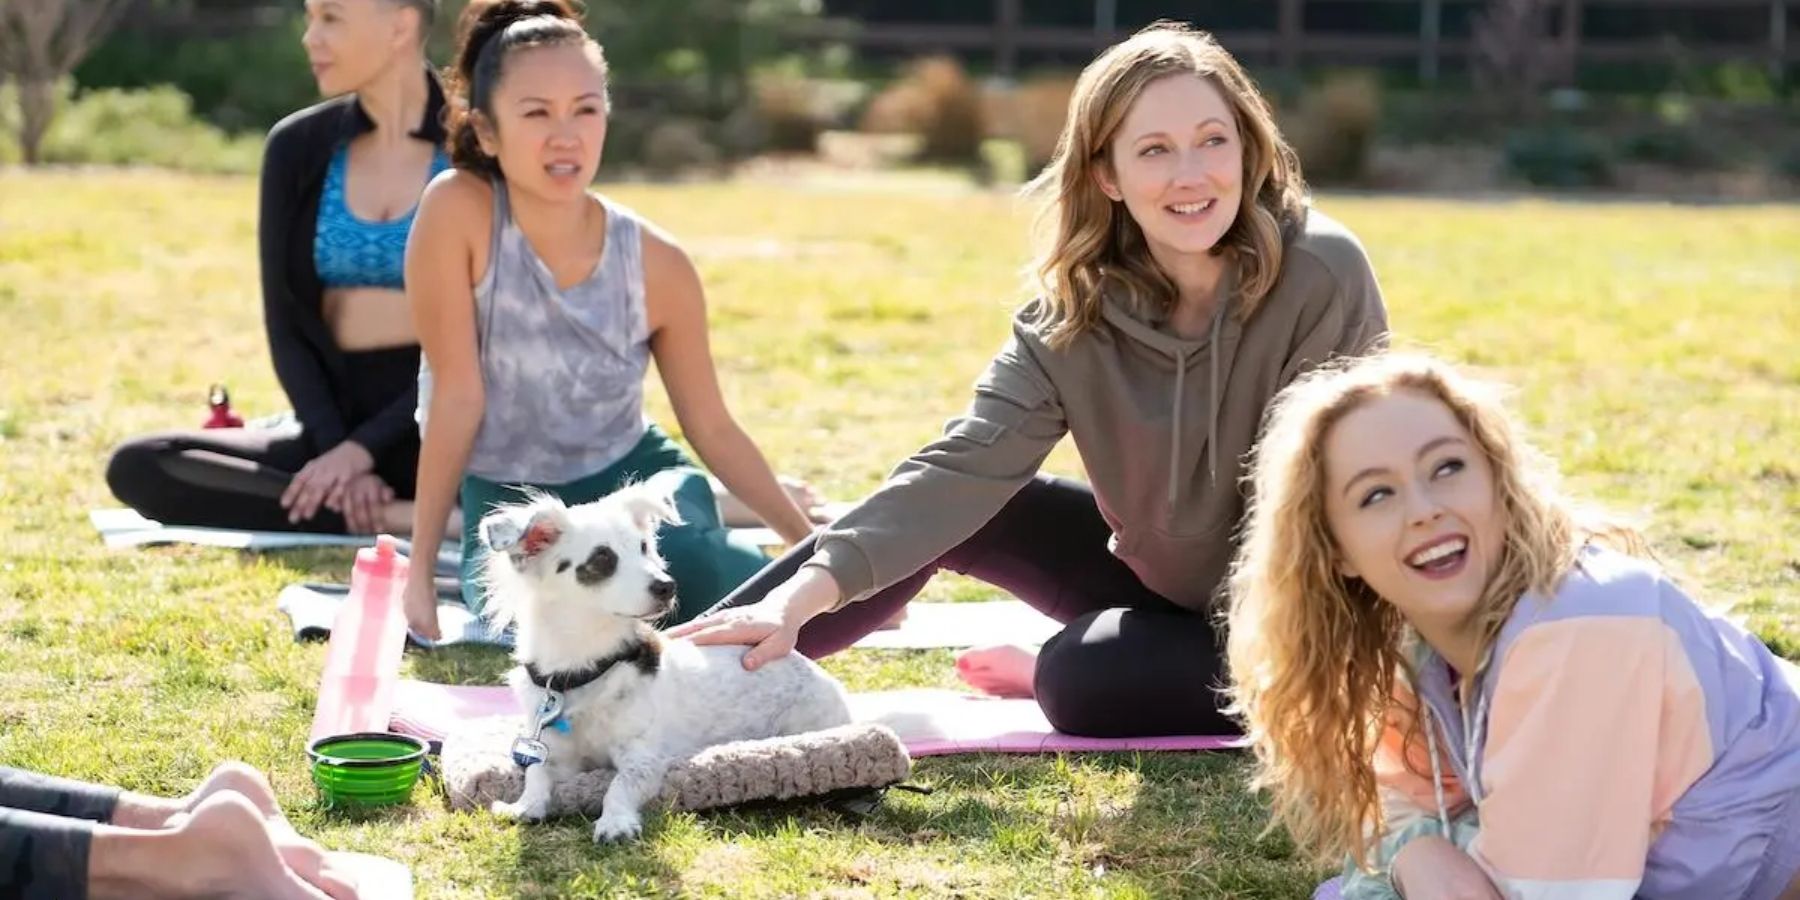 Judy Greer as Maggie on a lawn with a dog in "Good Boy" Into The Dark episode